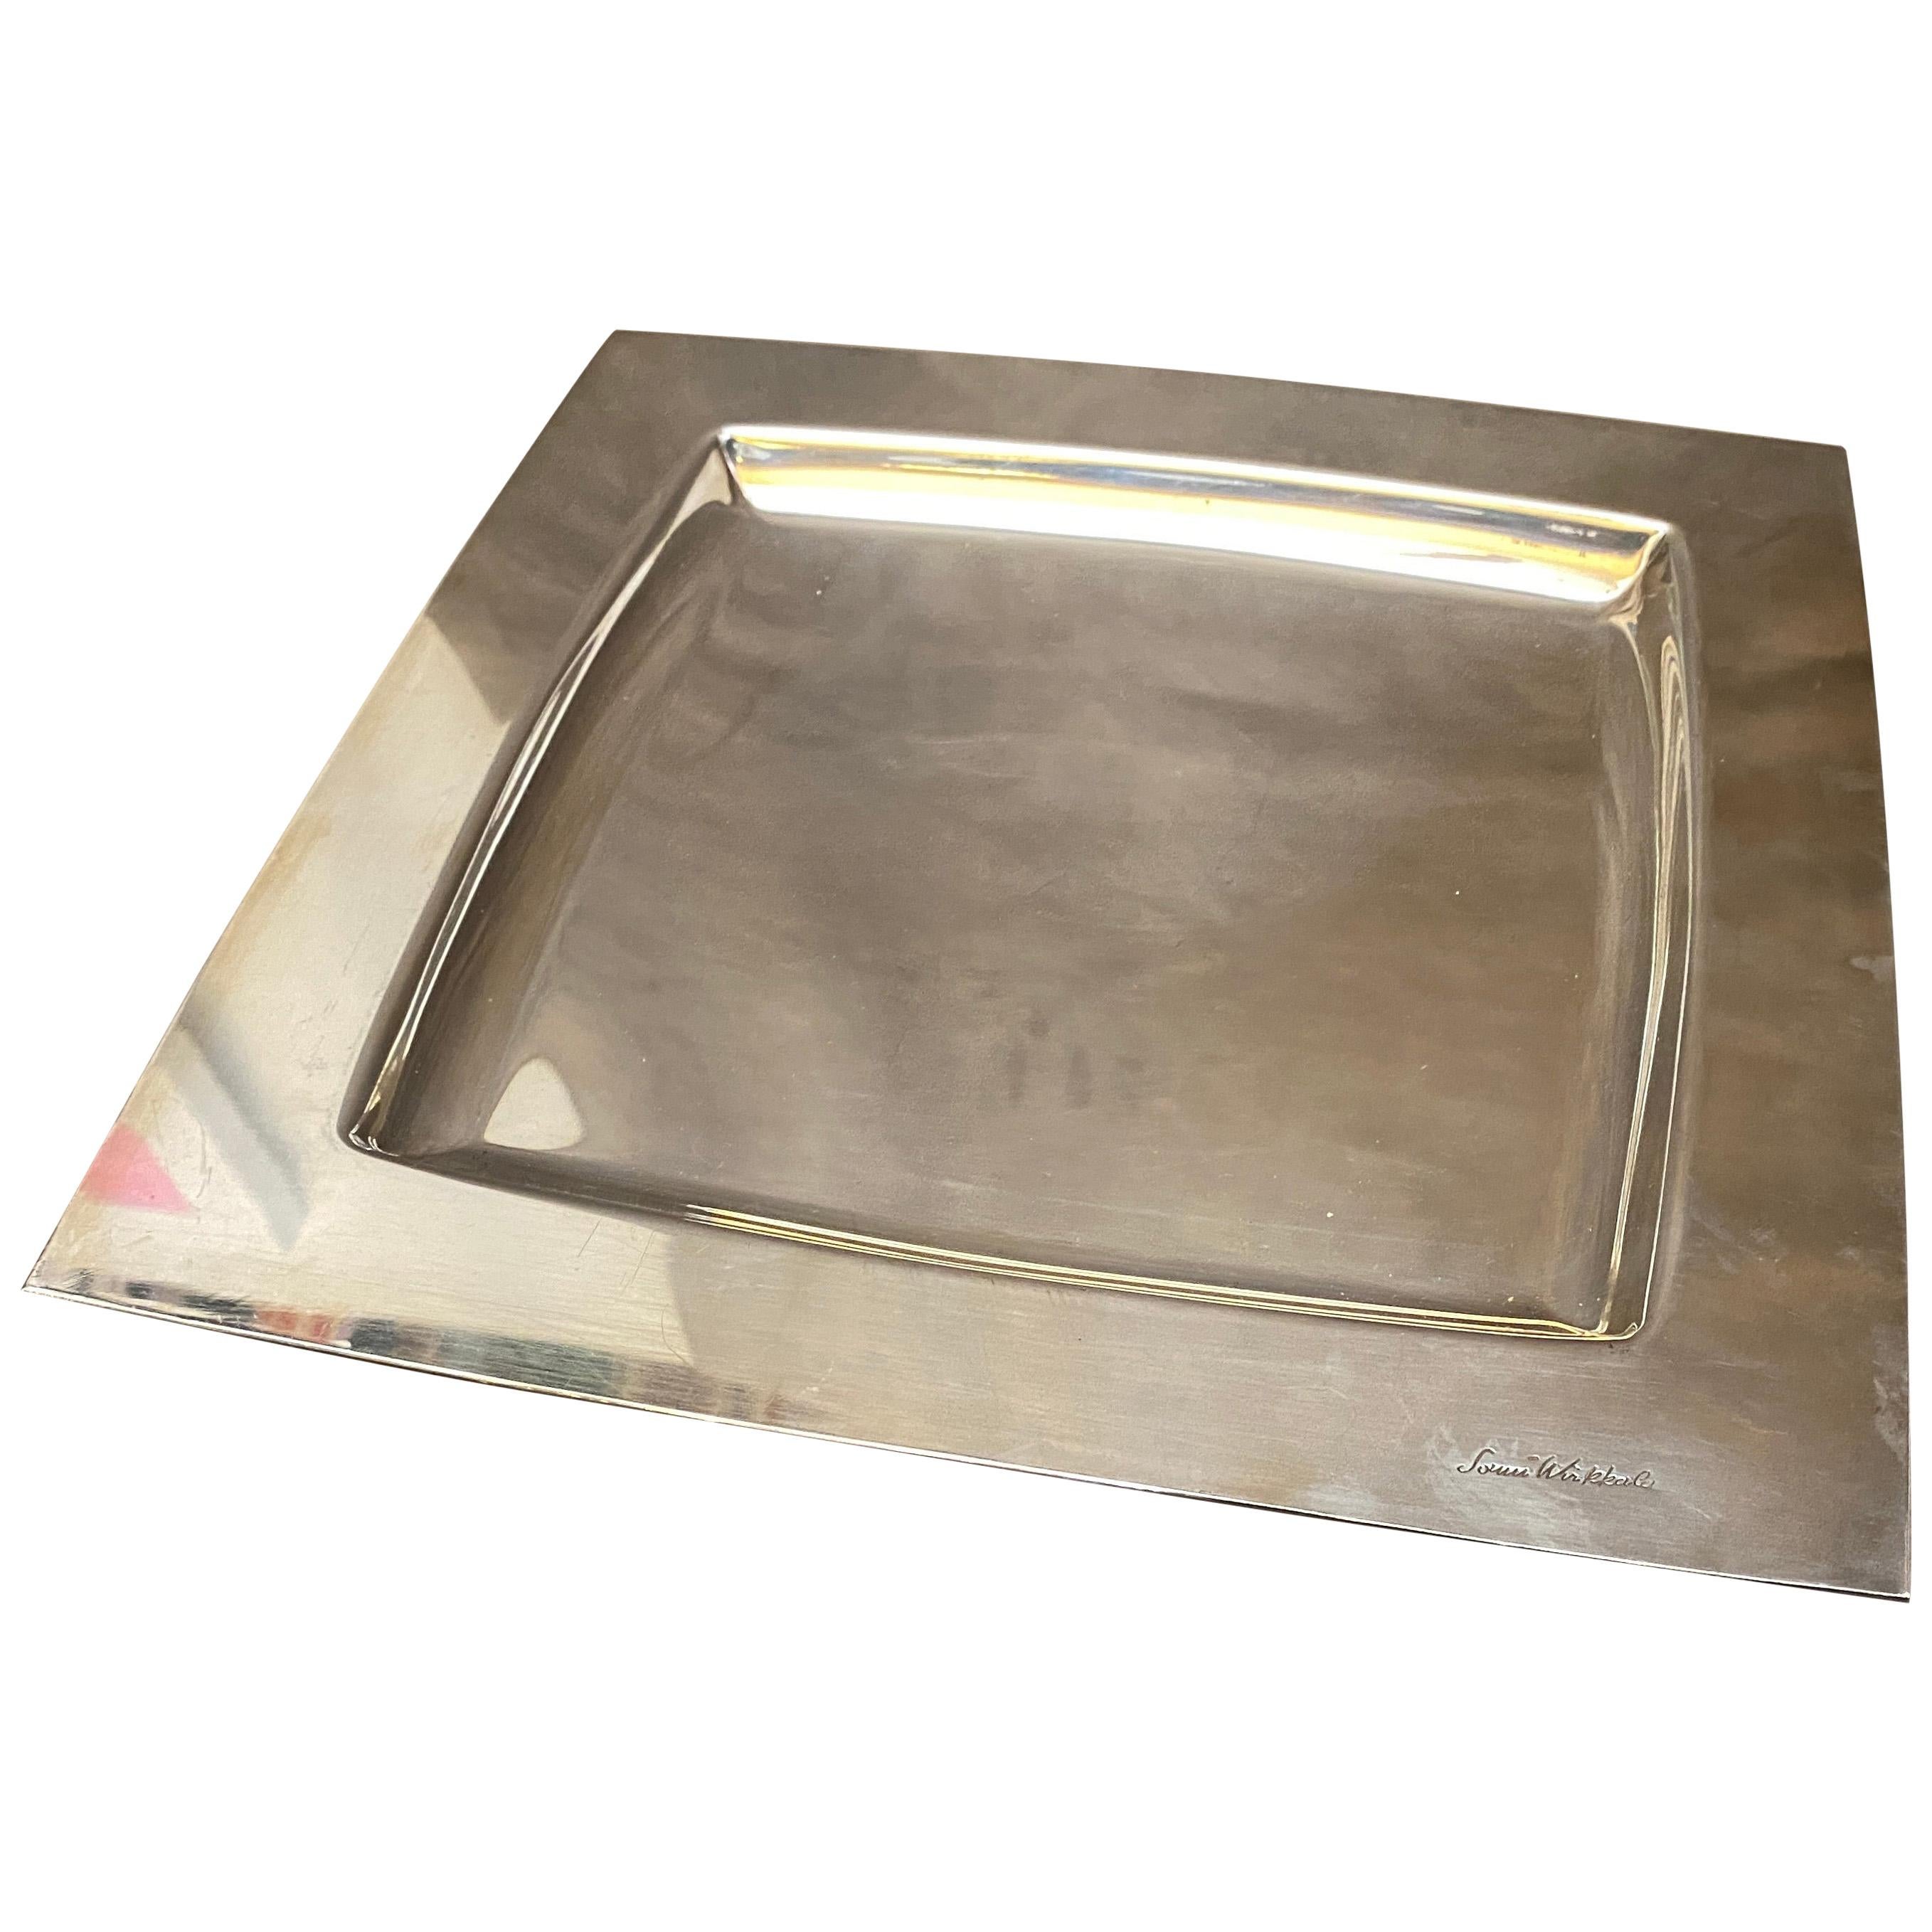 1980s Sami Wirkkala Silver Plated Square Tray Manufactured by Cleto Munari